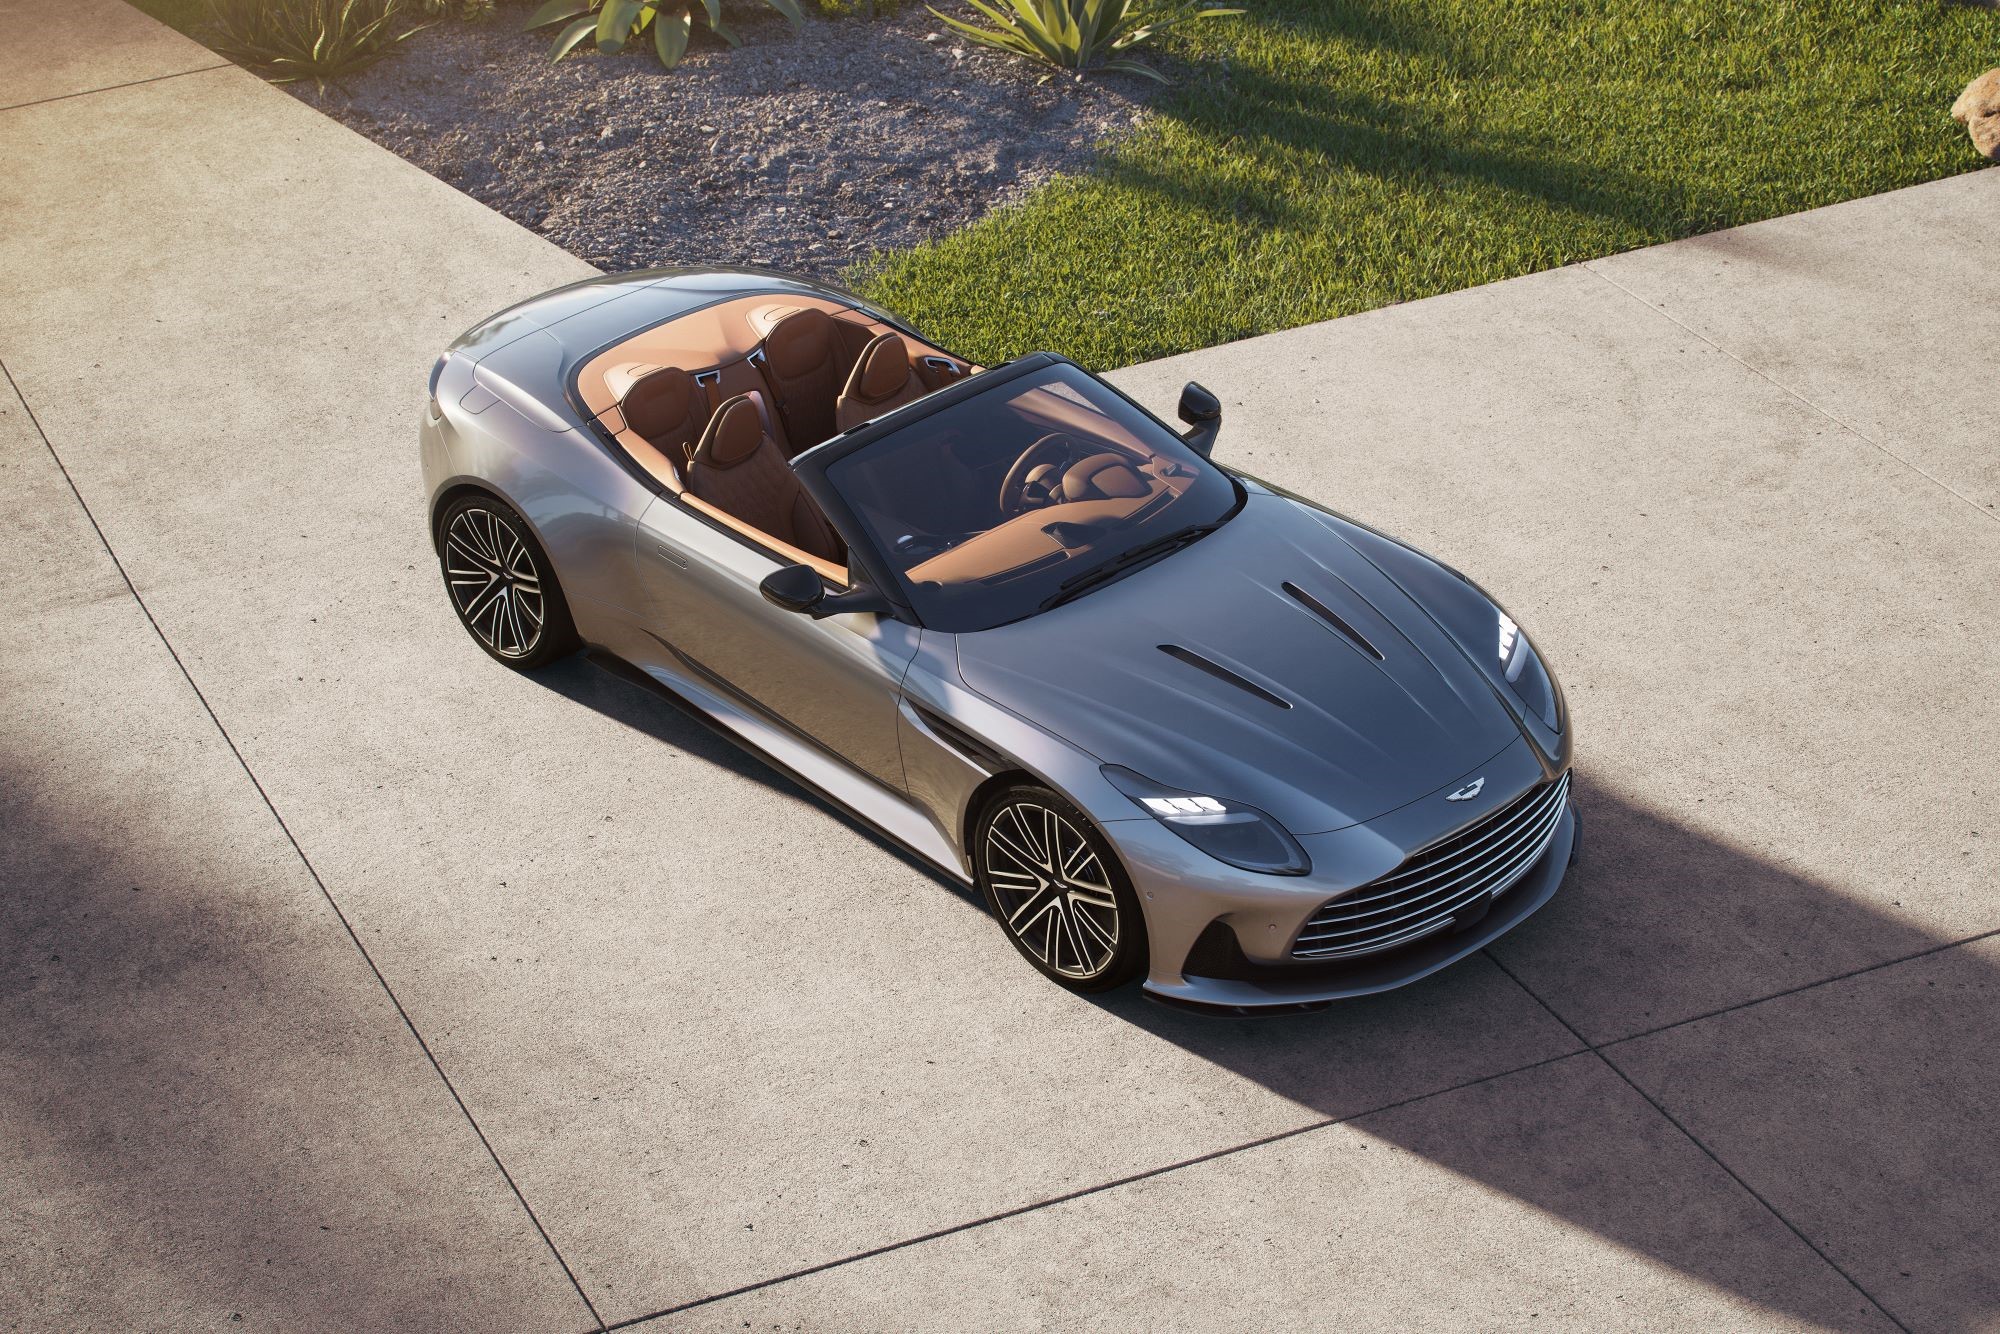 Aston Martin To Mark 110th Anniversary With Limited-Run Special Car